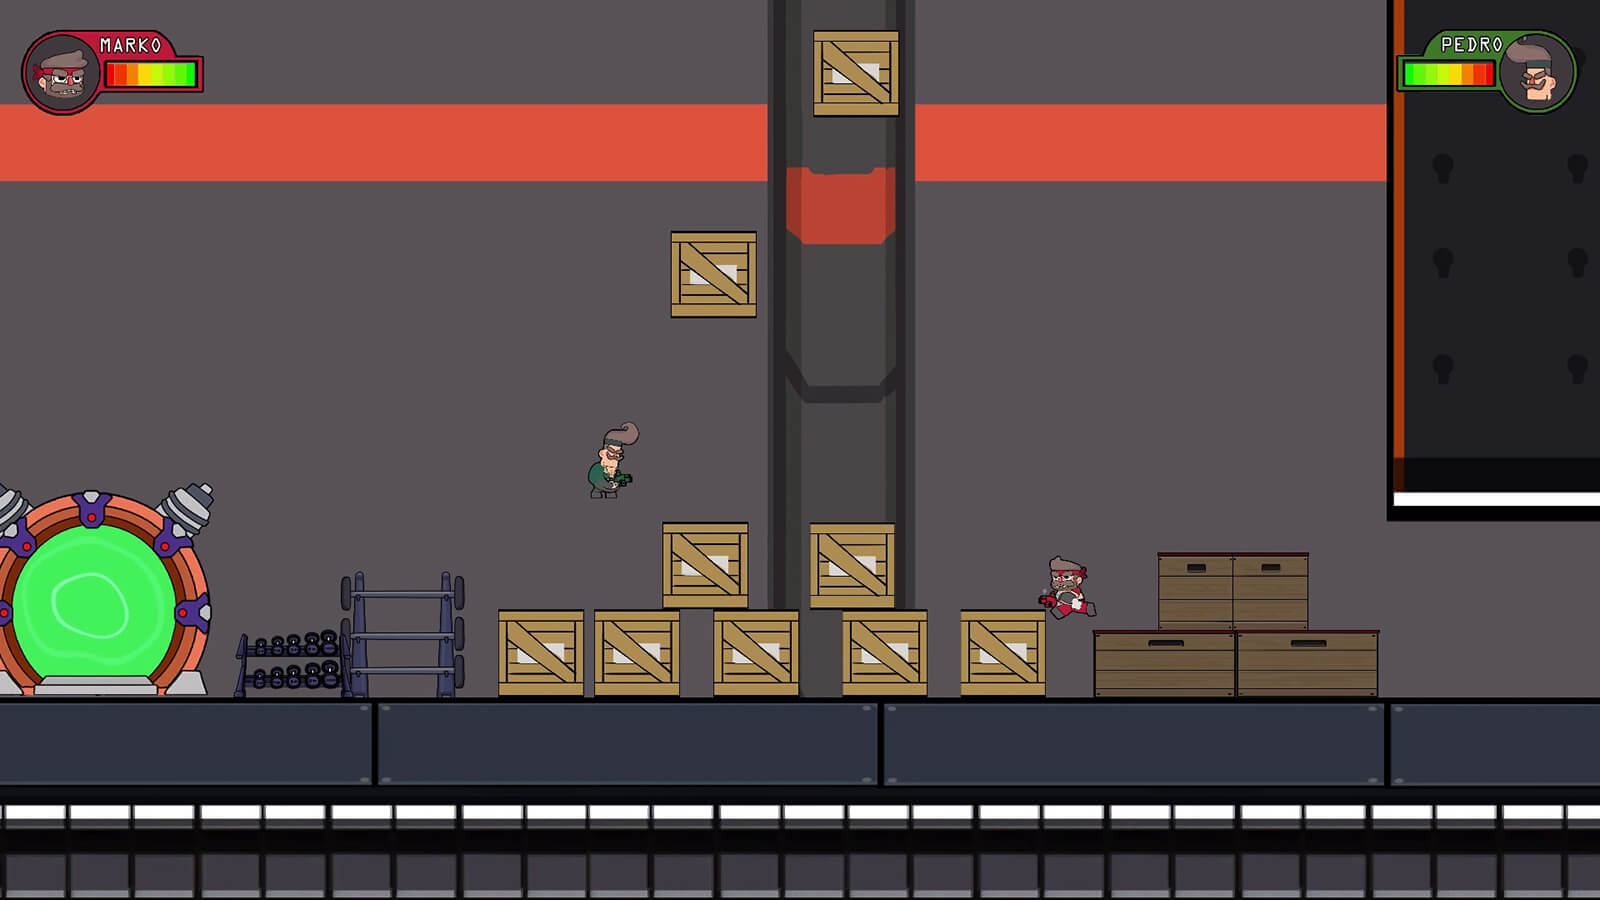 Two, 2D characters in red and green garb respectively jump around a gym environment while tossing wooden crates.